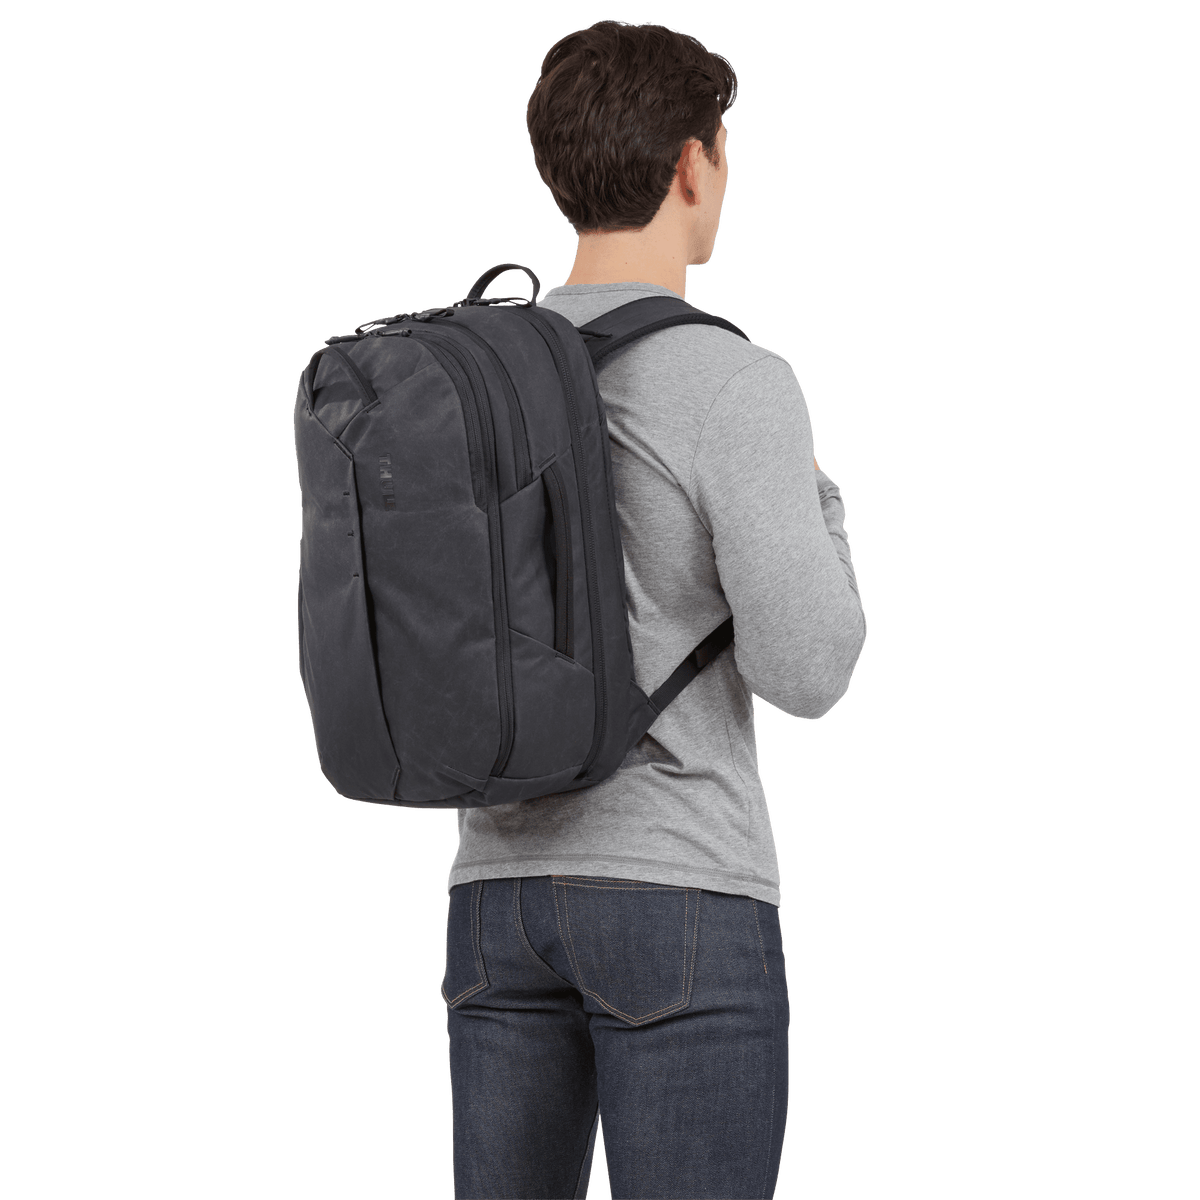 Aion Travel Backpack 28L | Thule - Wake Concept Store  